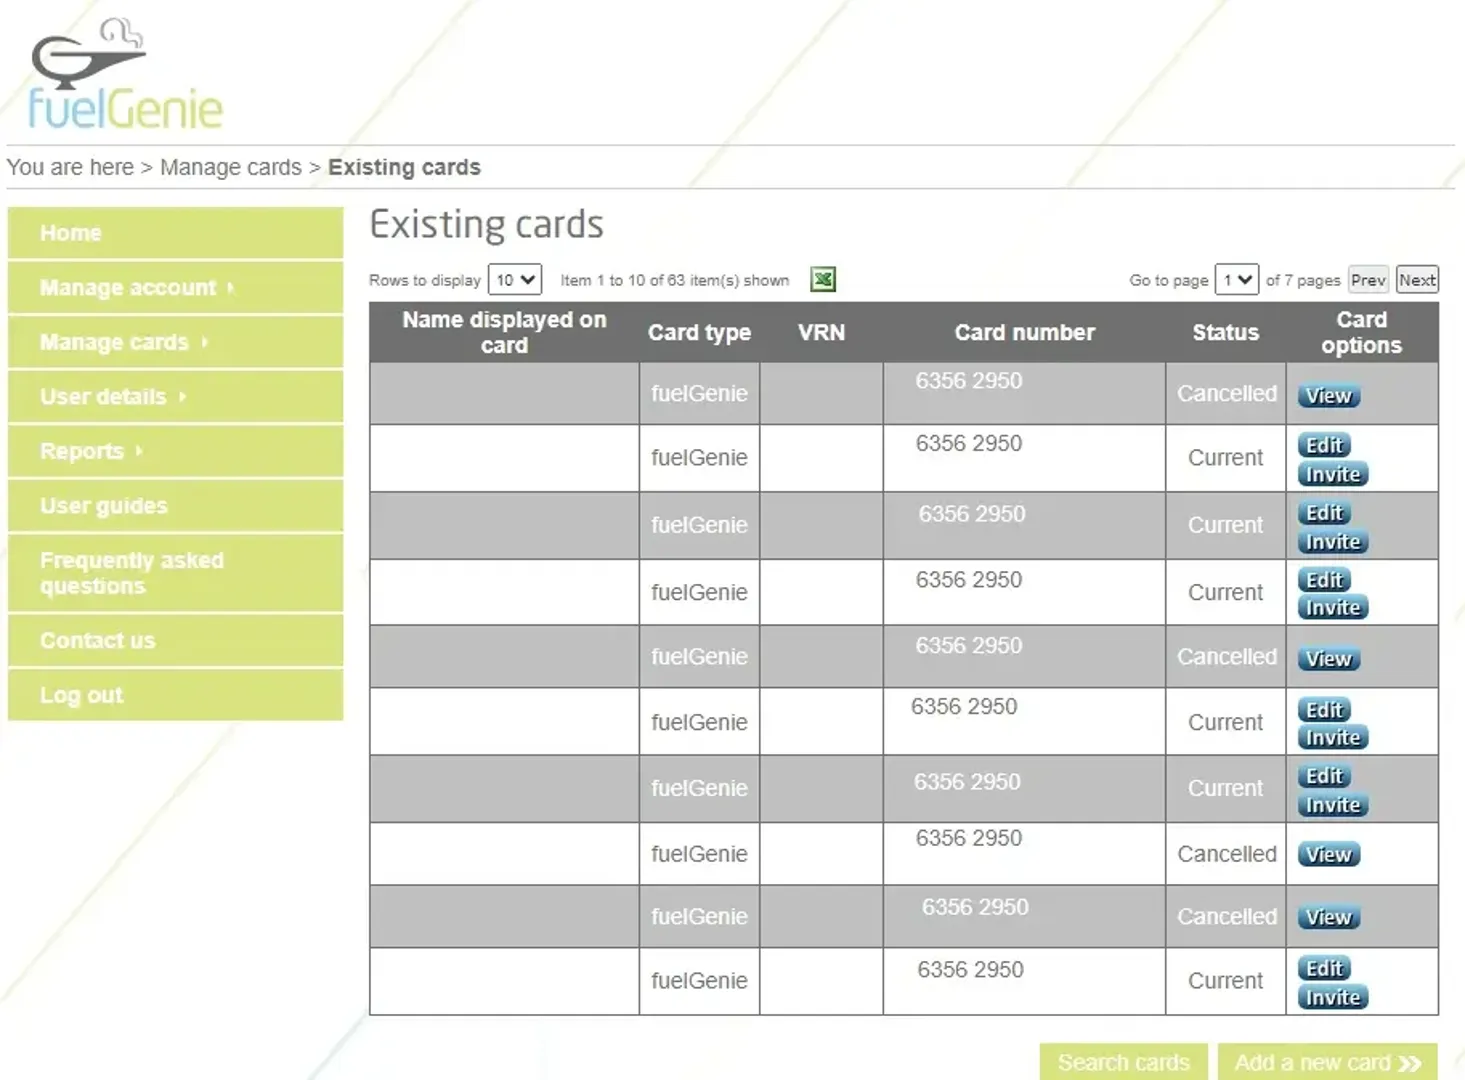 Dashboard view of existing cards in the fuelGenie account